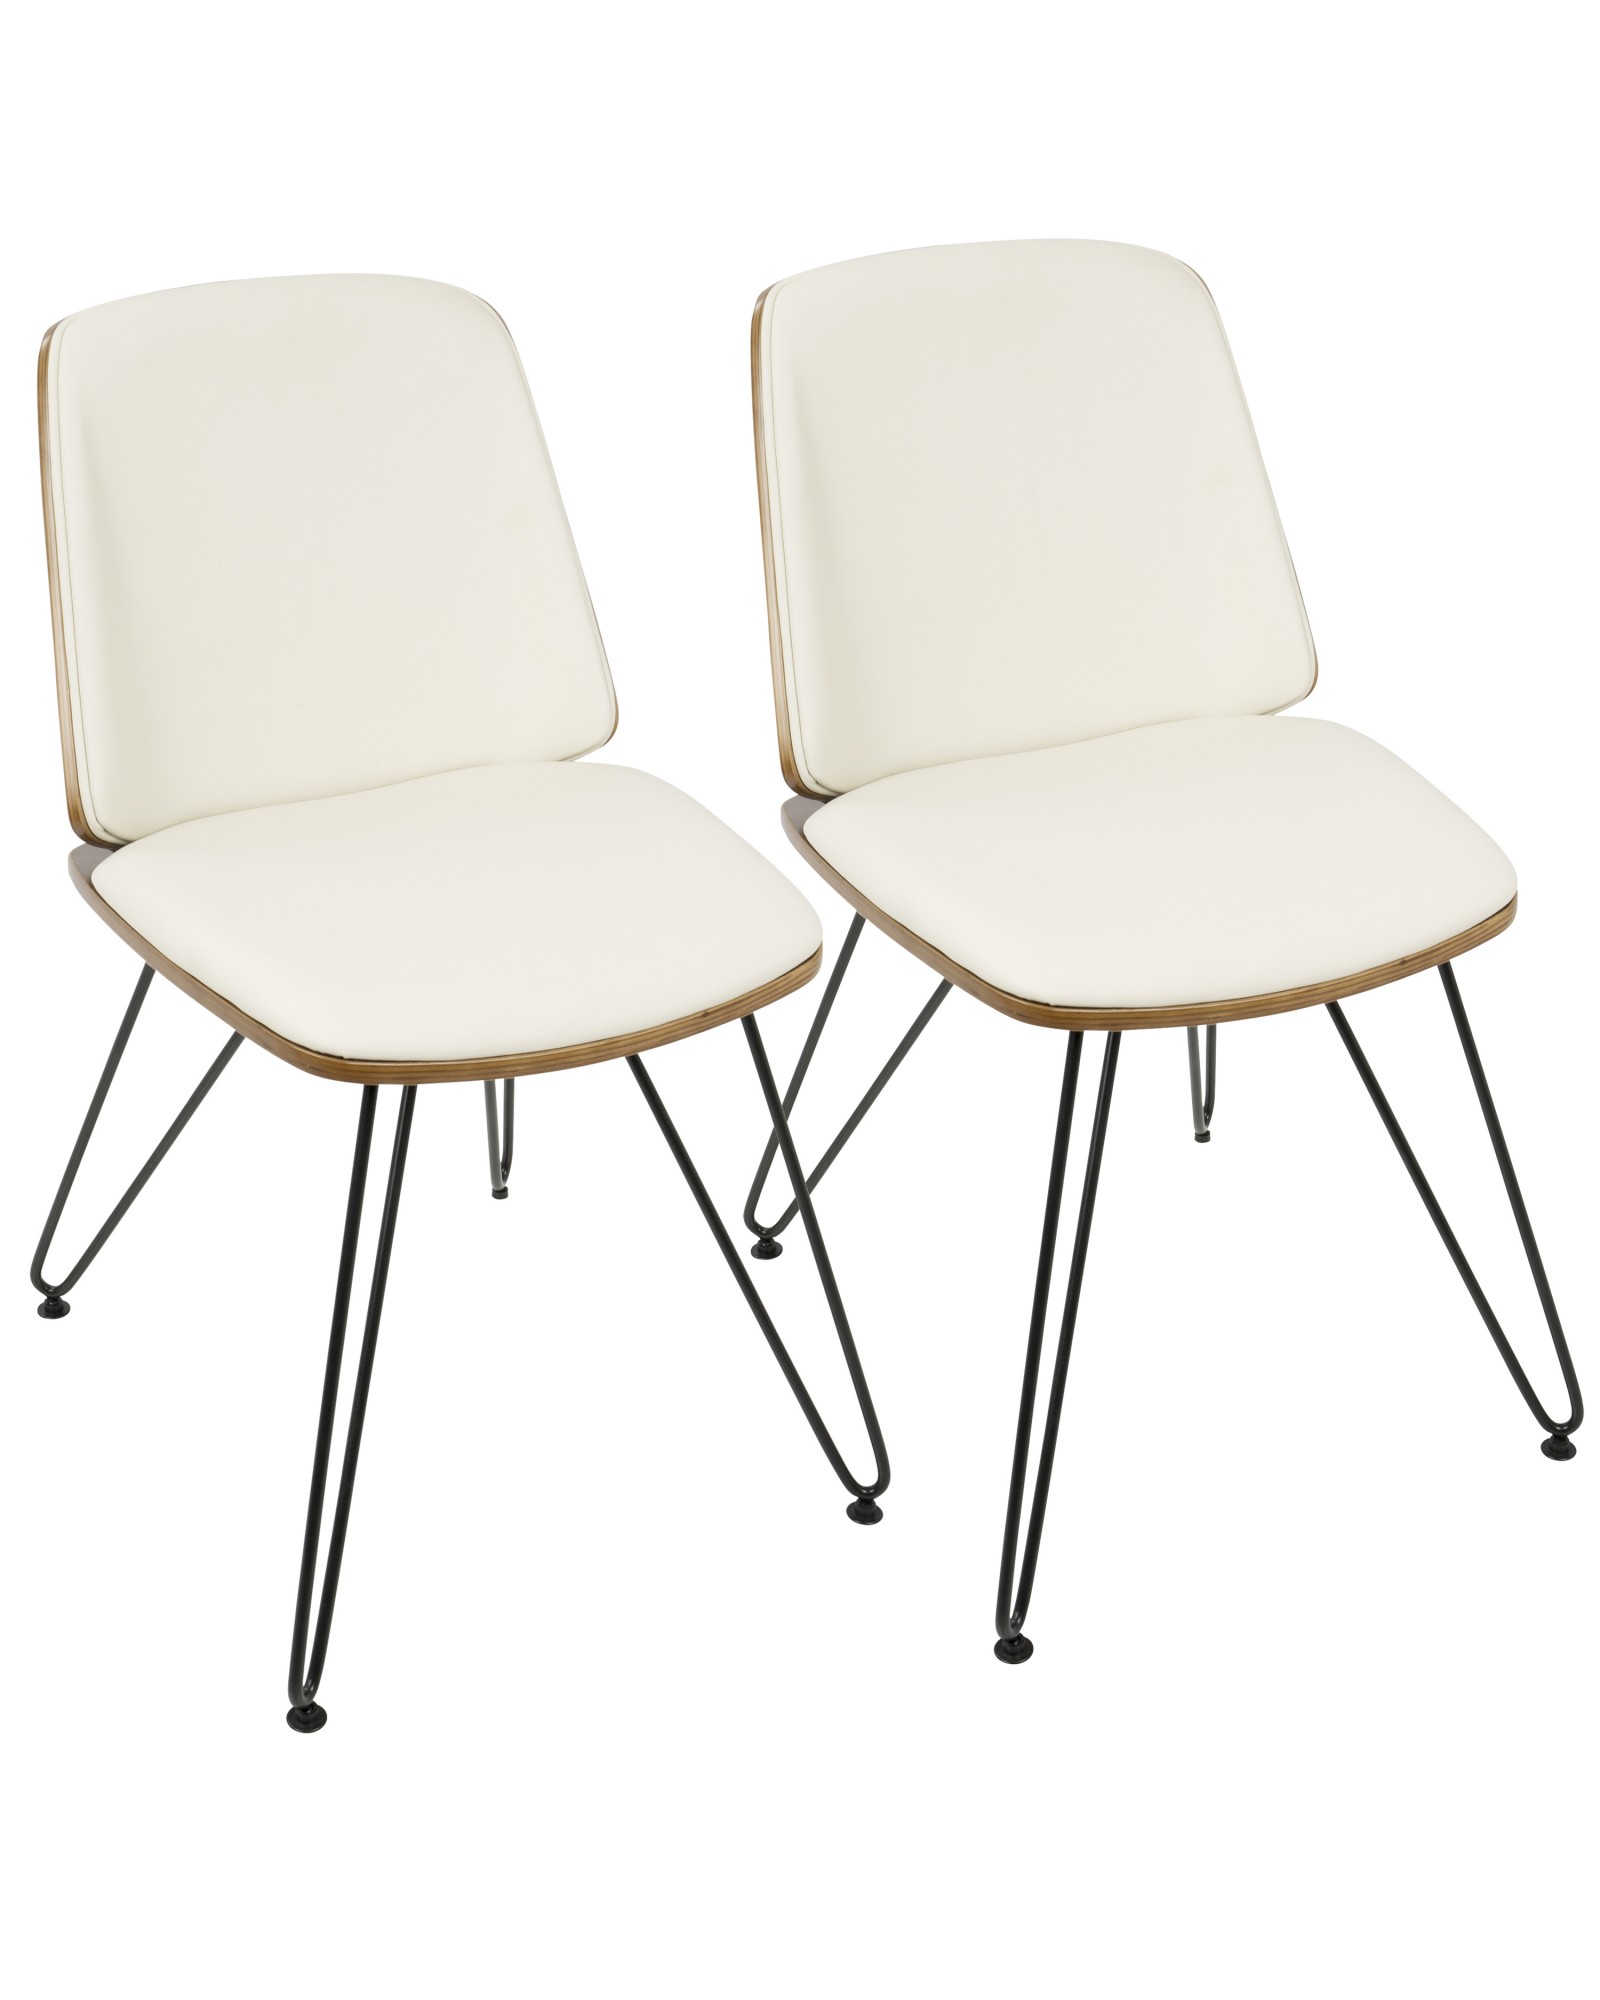 Avery Mid-Century Modern Dining/Accent Chair in Walnut Wood and Cream Faux Leather - Set of 2